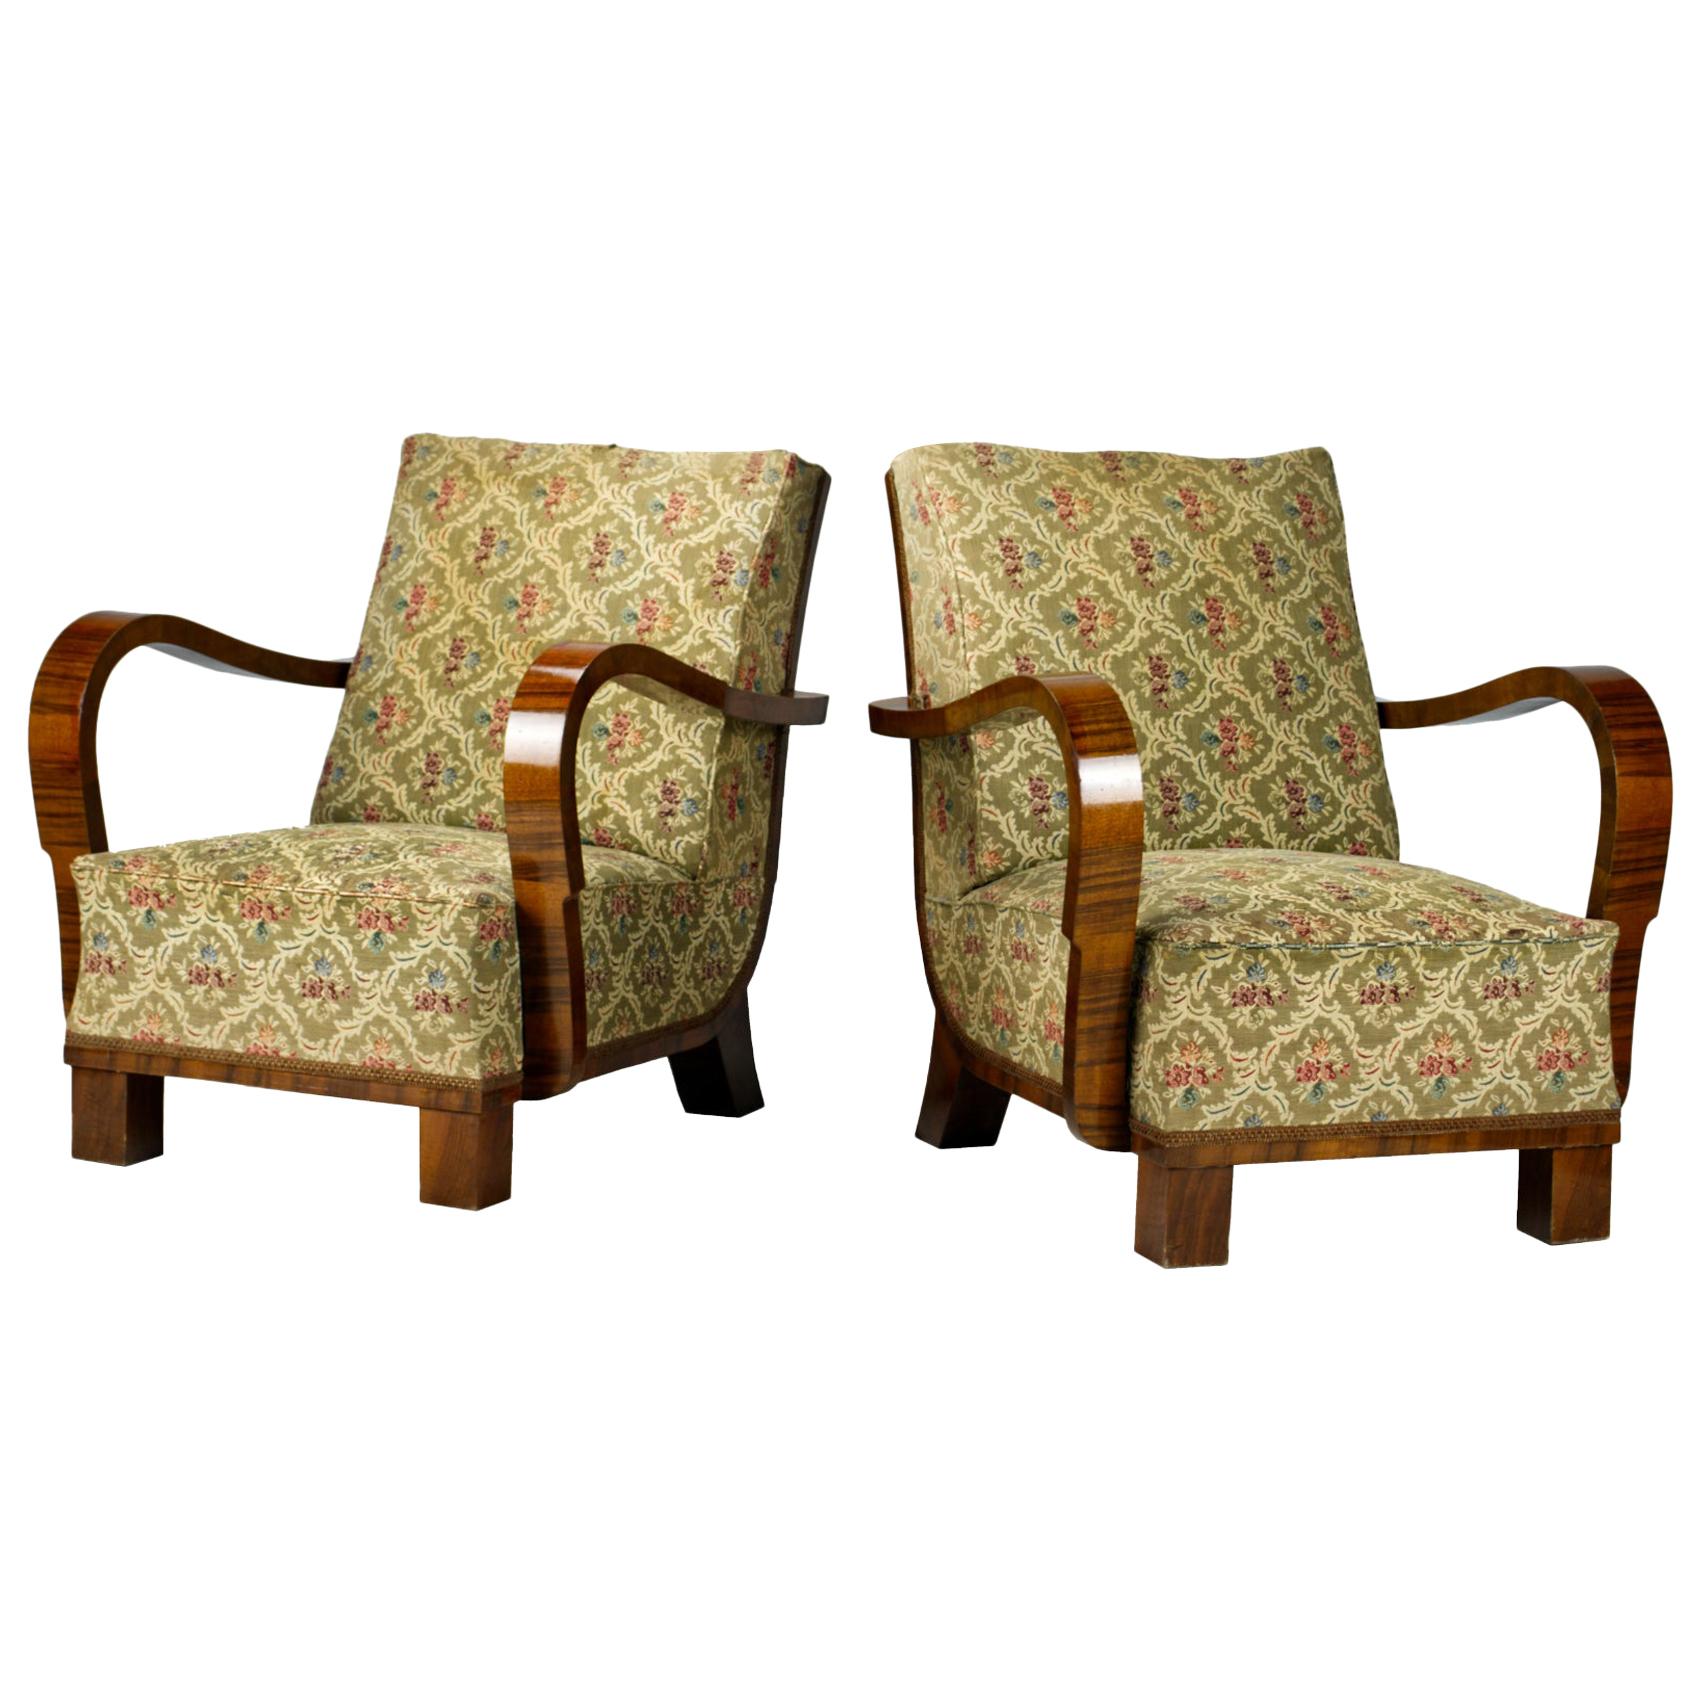 Pair of Art Deco Armchairs / Lounge Chairs, 1930s